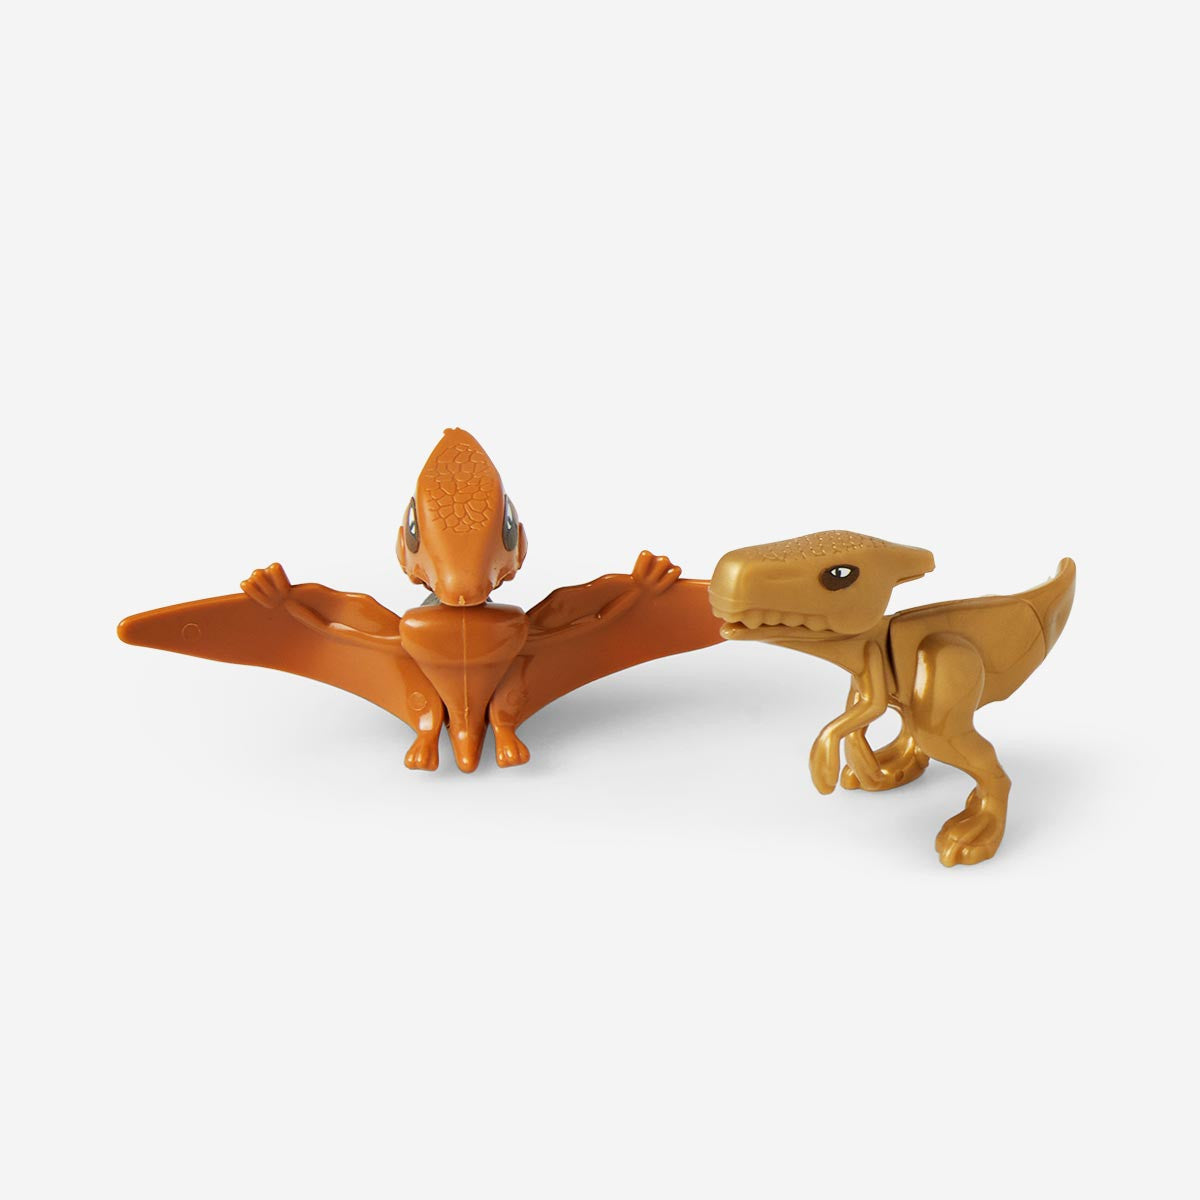 Build-your-own-dinosaurs Toy Flying Tiger Copenhagen 